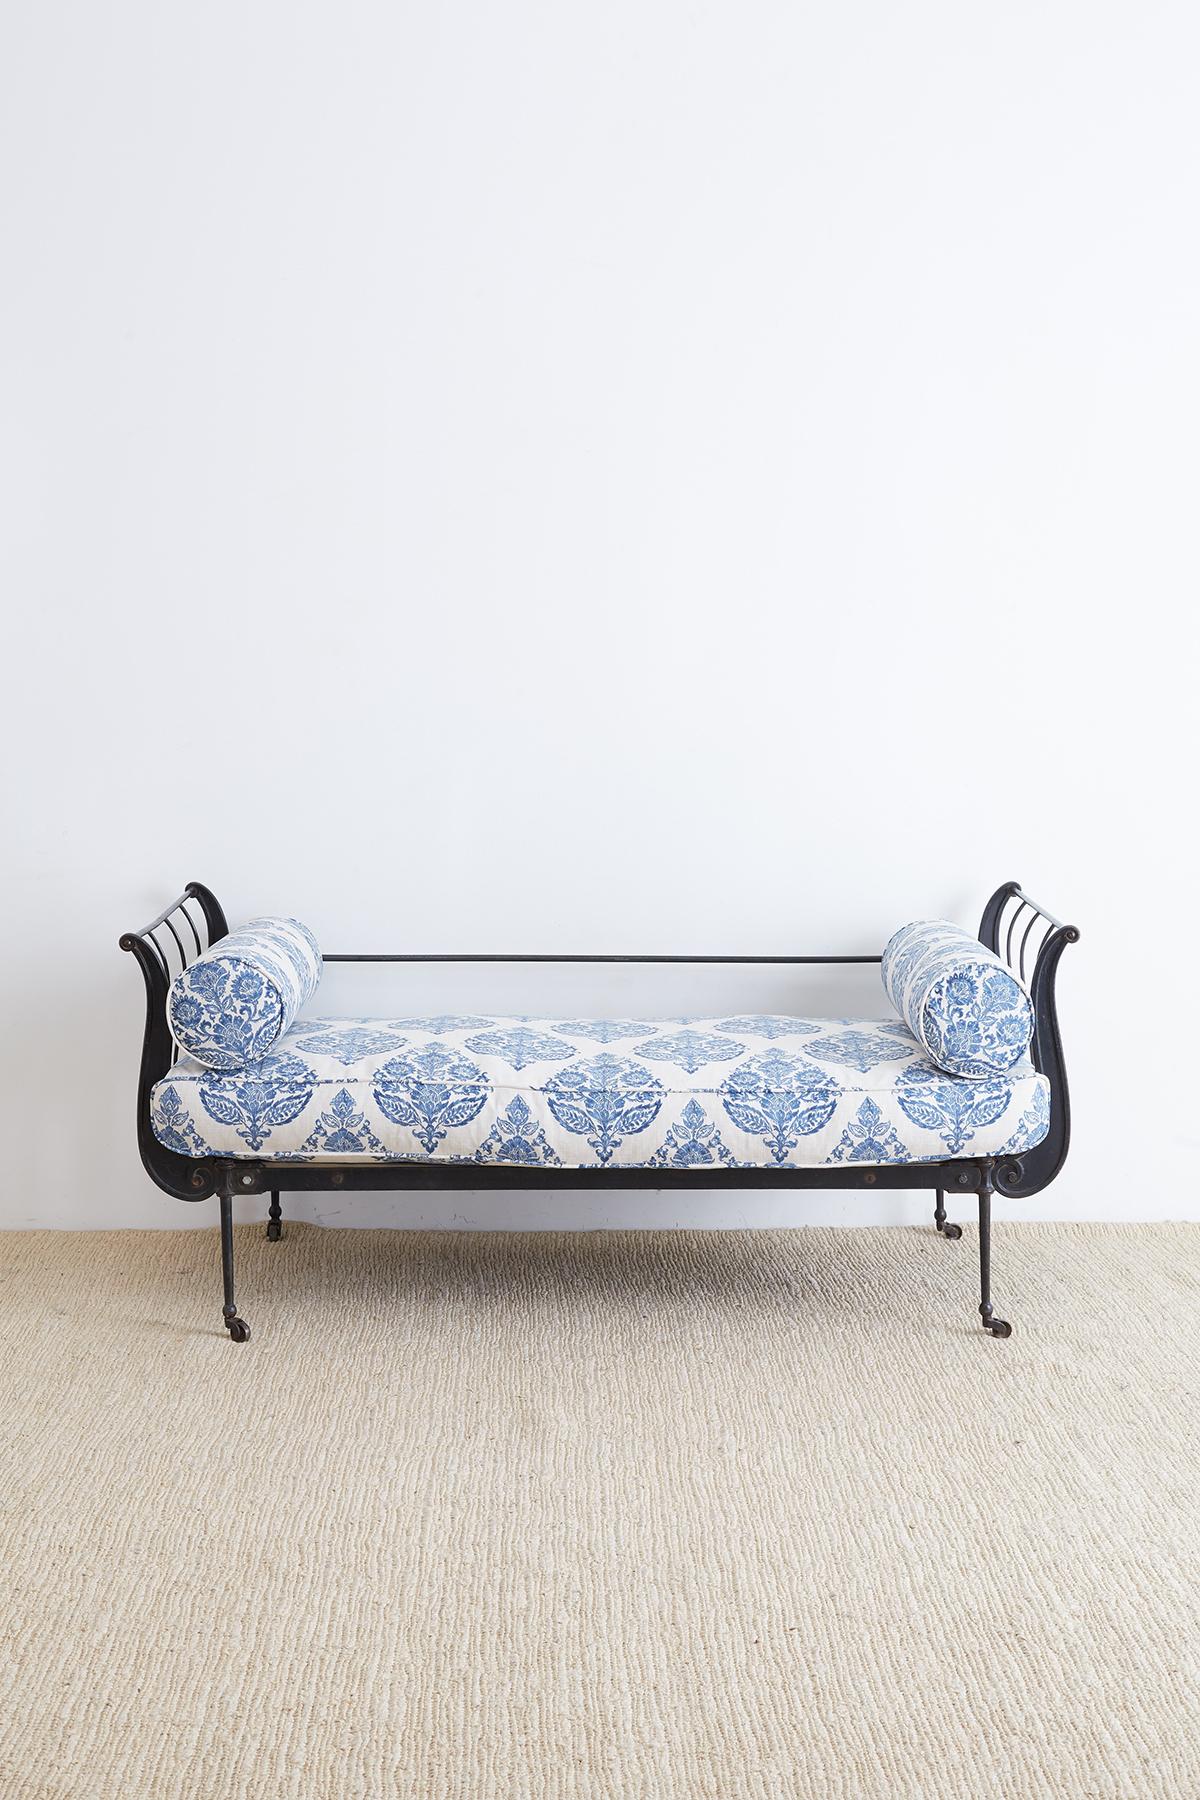 Fabulous late 19th century, French cast iron daybed with a modern blue and white linen redux. Elegant cast iron frame made in a simple refined style free from ornate decorations. The back has been later reinforced with two cross stretchers. Newly